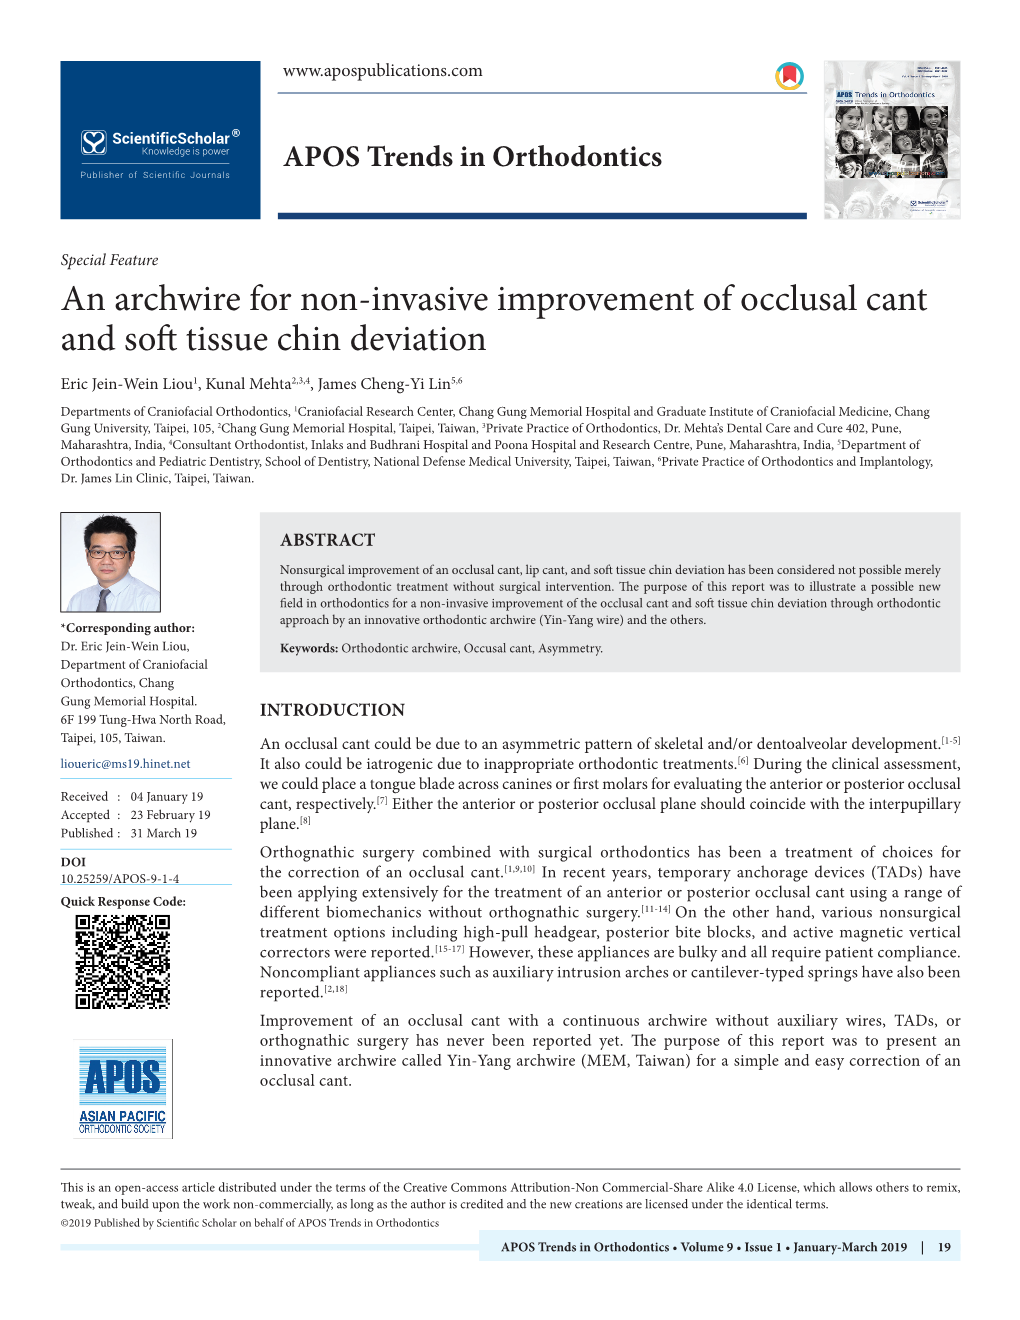 An Archwire for Non-Invasive Improvement of Occlusal Cant And